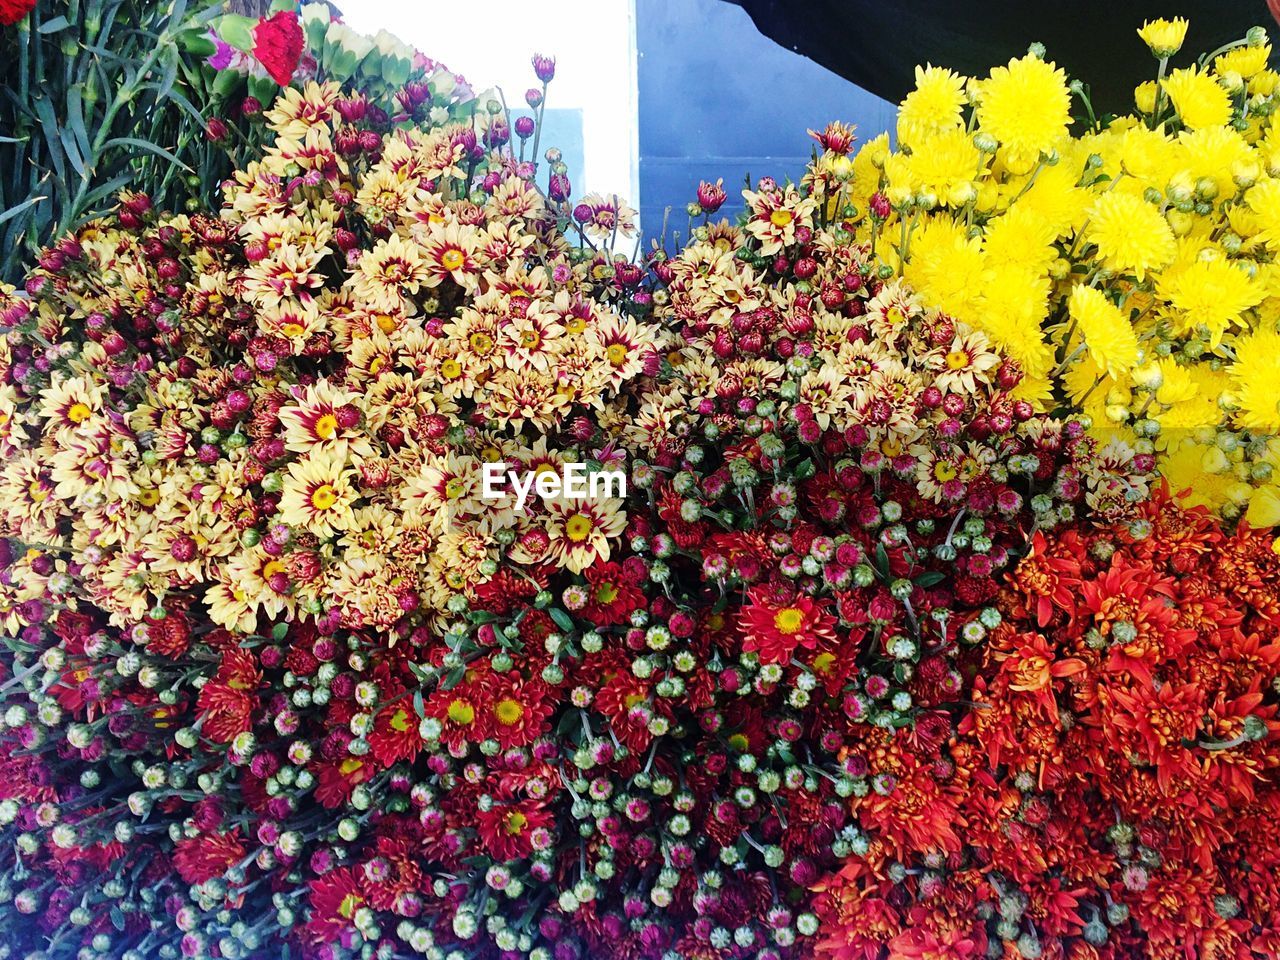 Flowers for sale at market stall